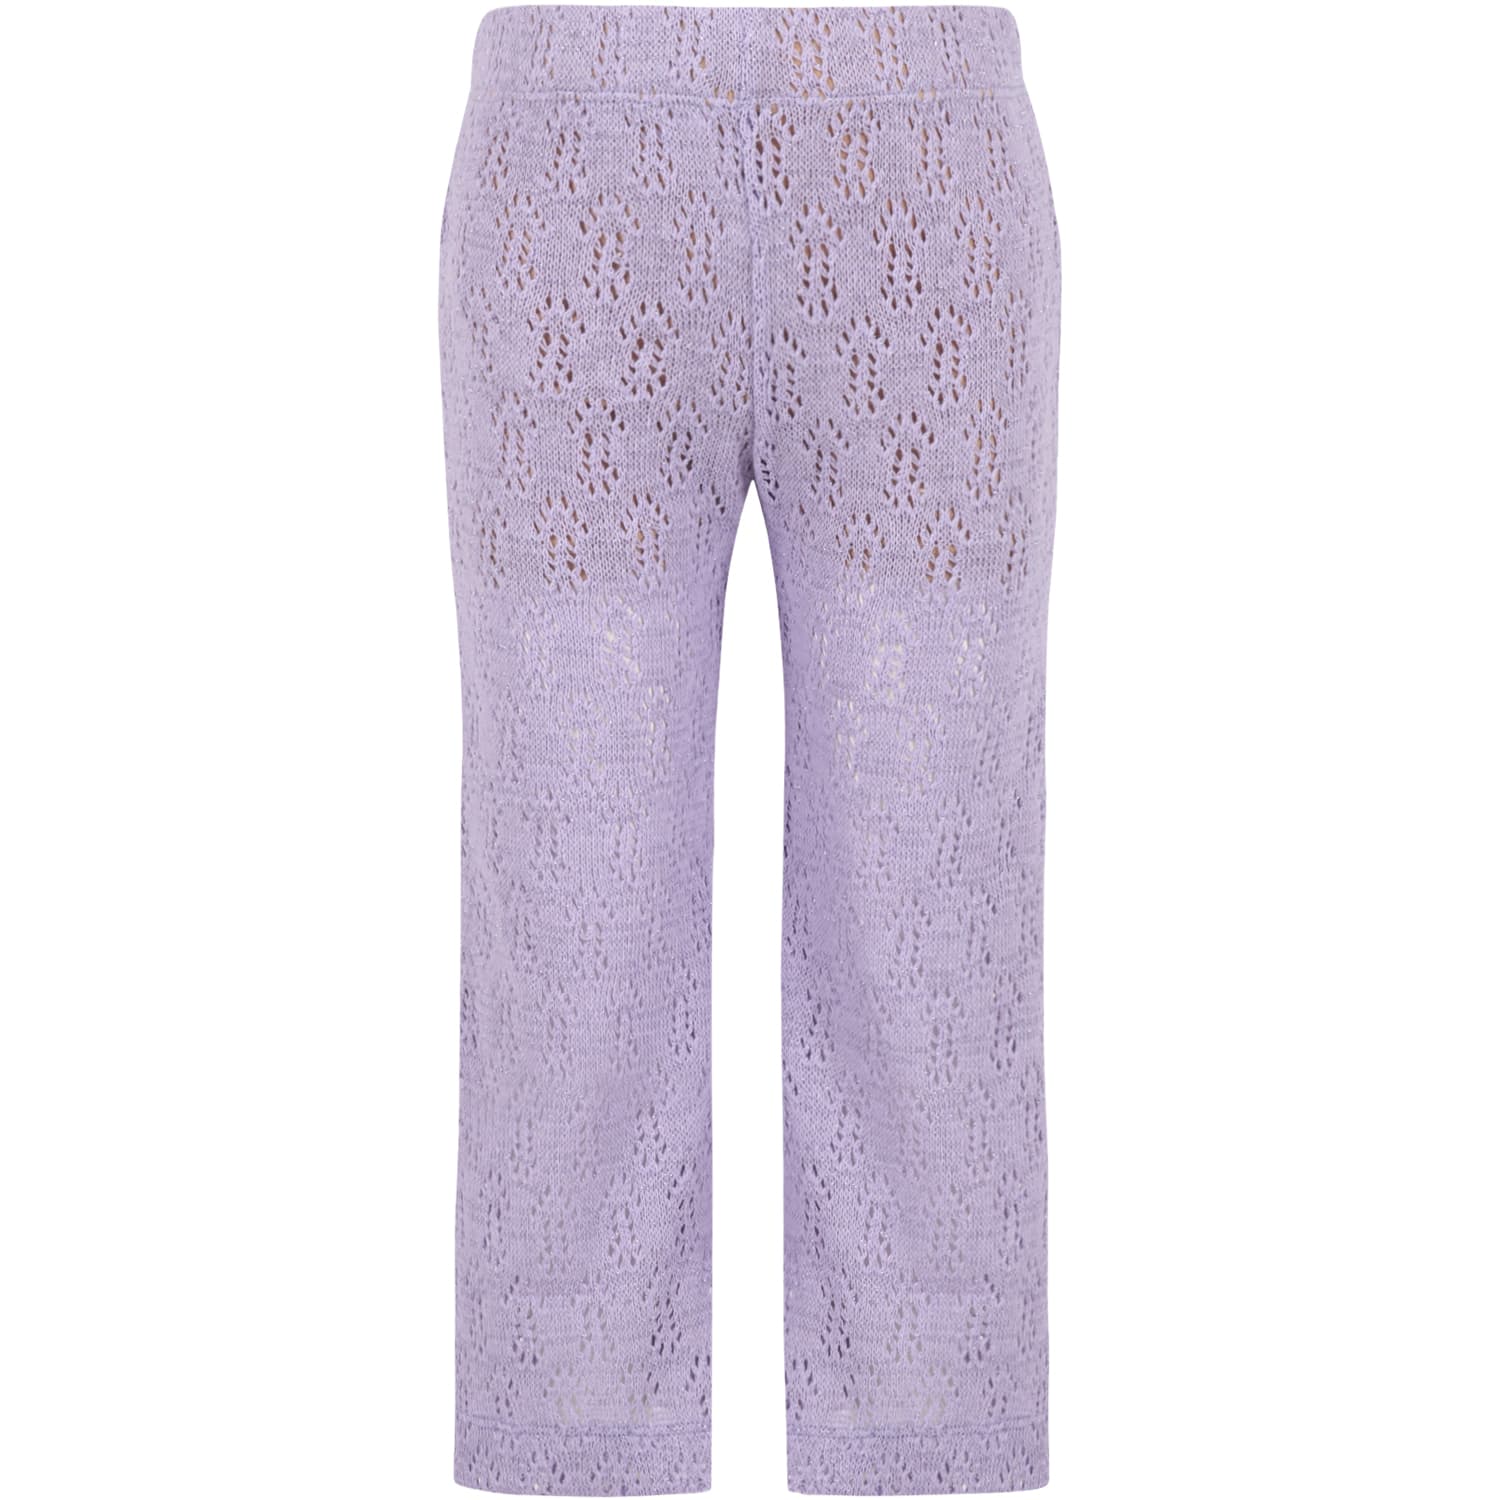 CAFFE' D'ORZO PURPLE TROUSERS FOR GIRL